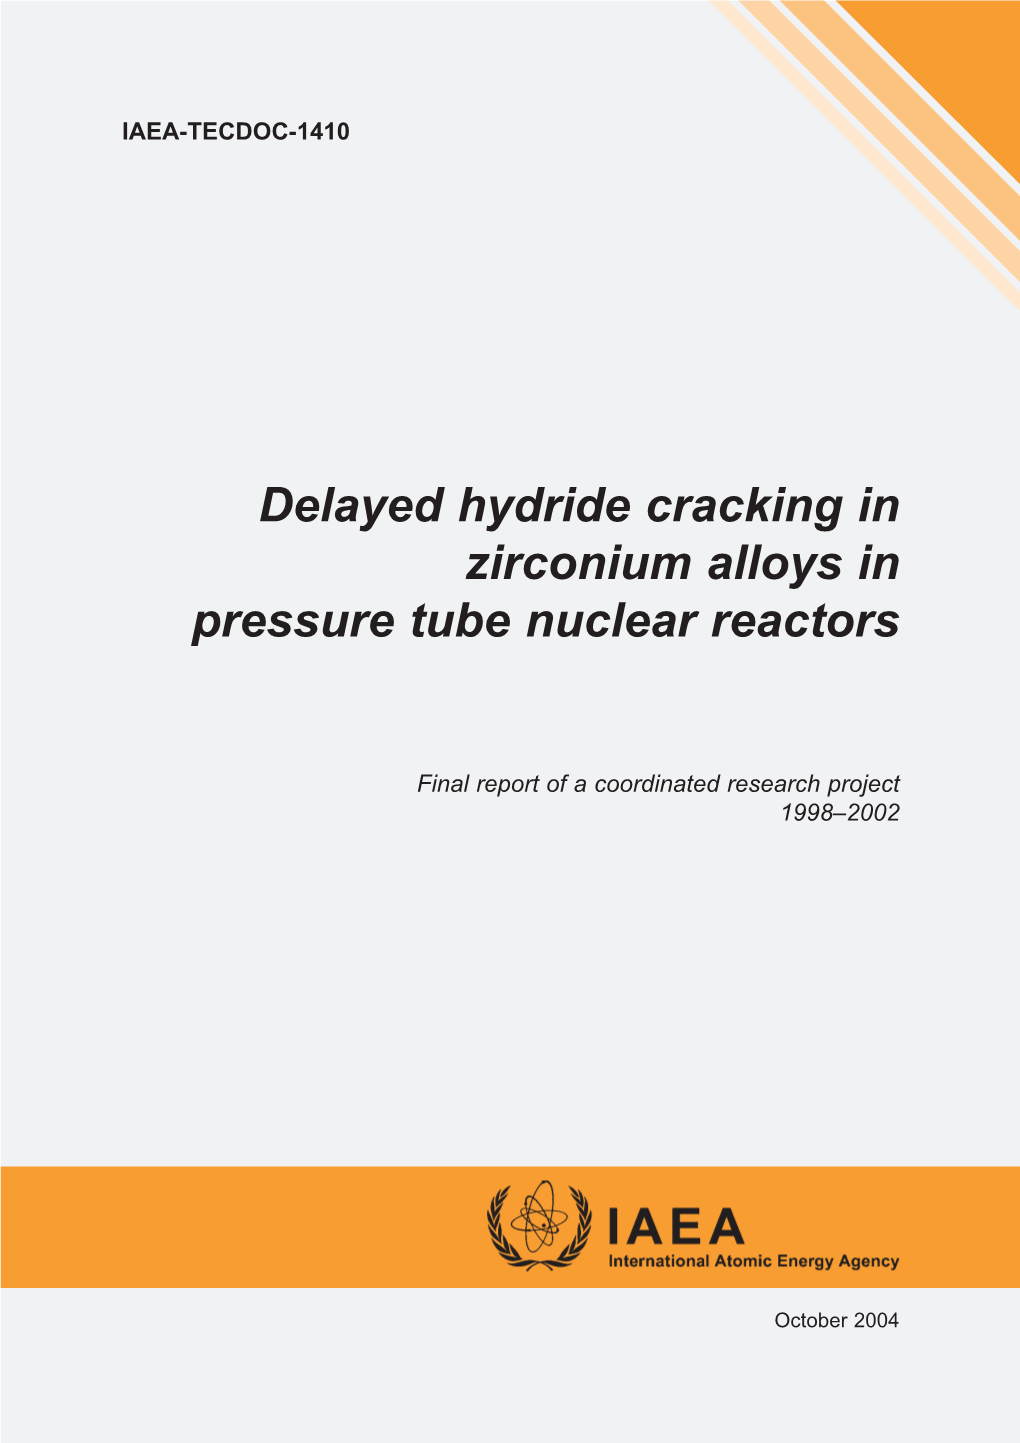 Delayed Hydride Cracking in Zirconium Alloys in Pressure Tube Nuclear Reactors